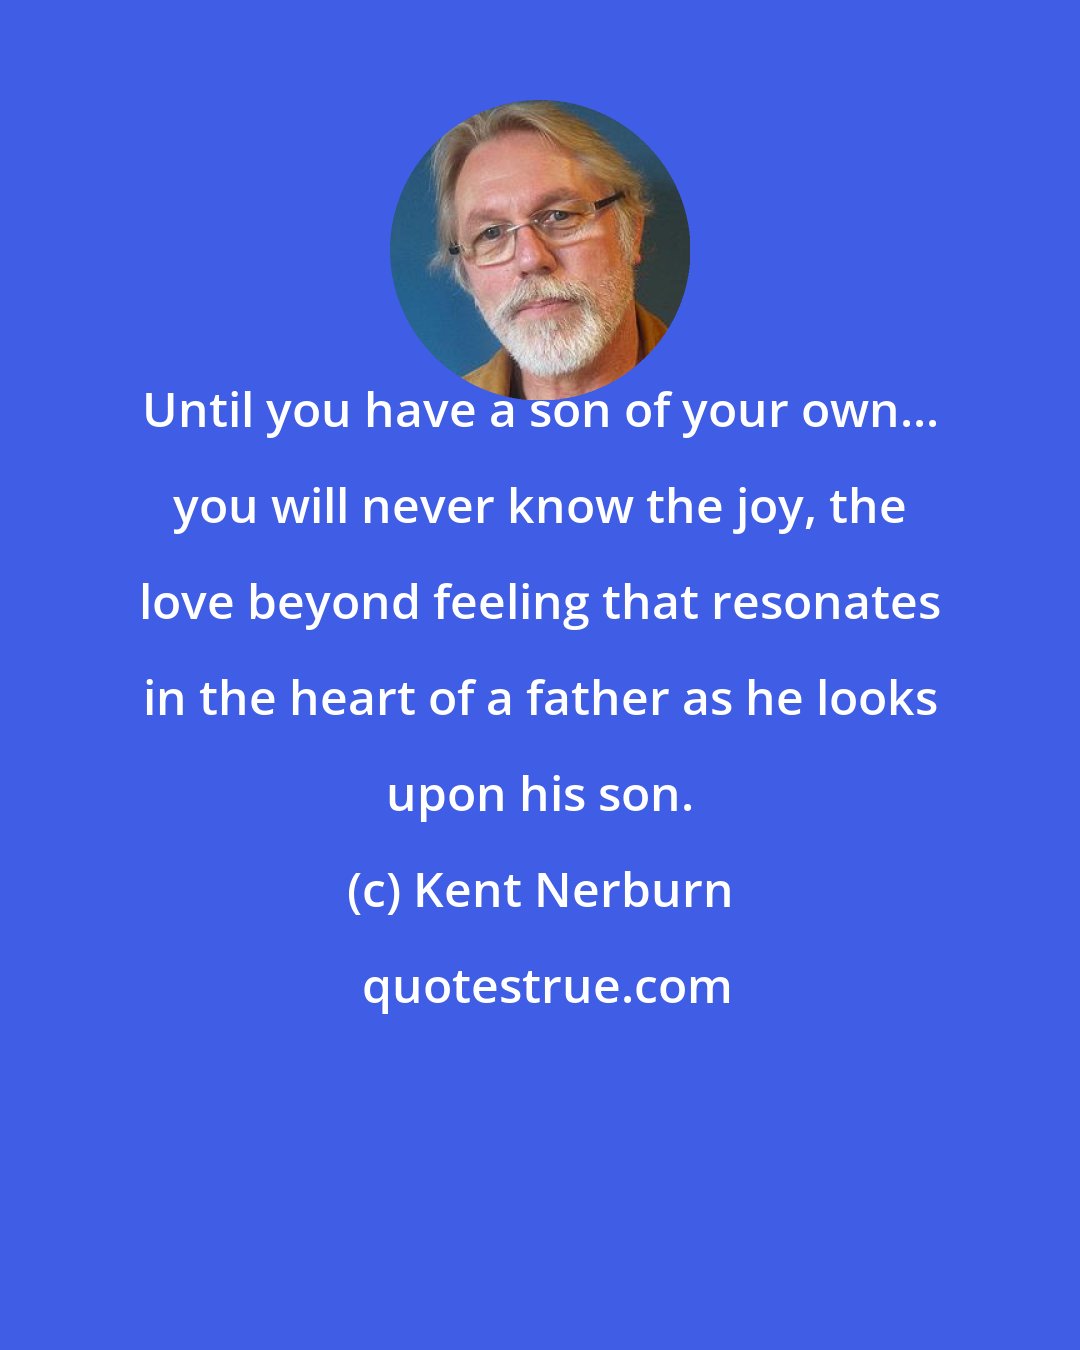 Kent Nerburn: Until you have a son of your own... you will never know the joy, the love beyond feeling that resonates in the heart of a father as he looks upon his son.